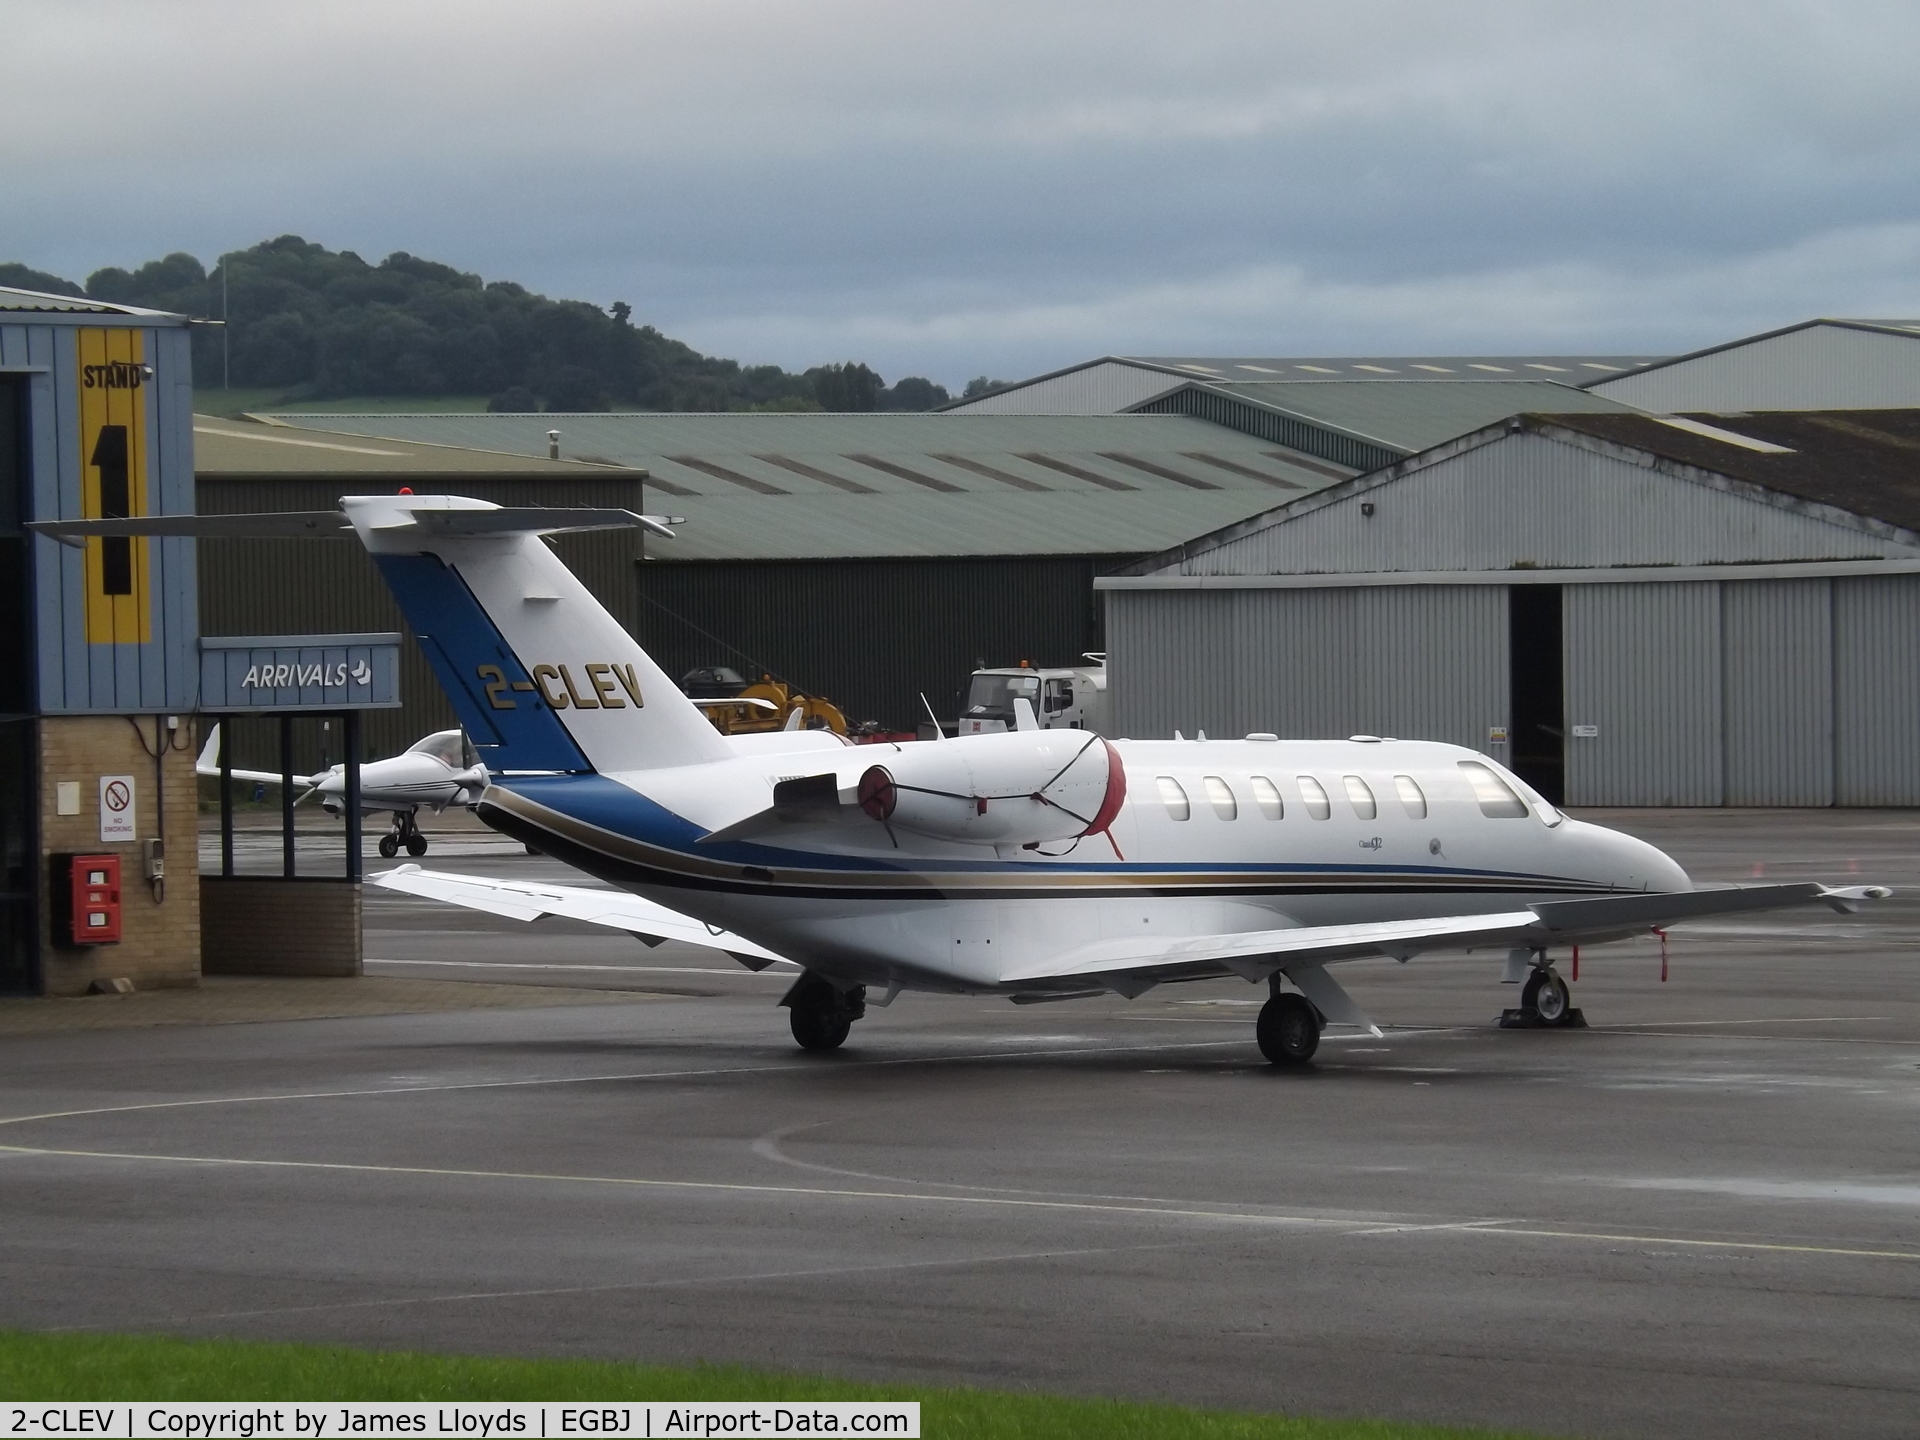 2-CLEV, 2000 Cessna 525A CitationJet CJ2 C/N 525A0003, Parked up at Gloucestershire Airport.